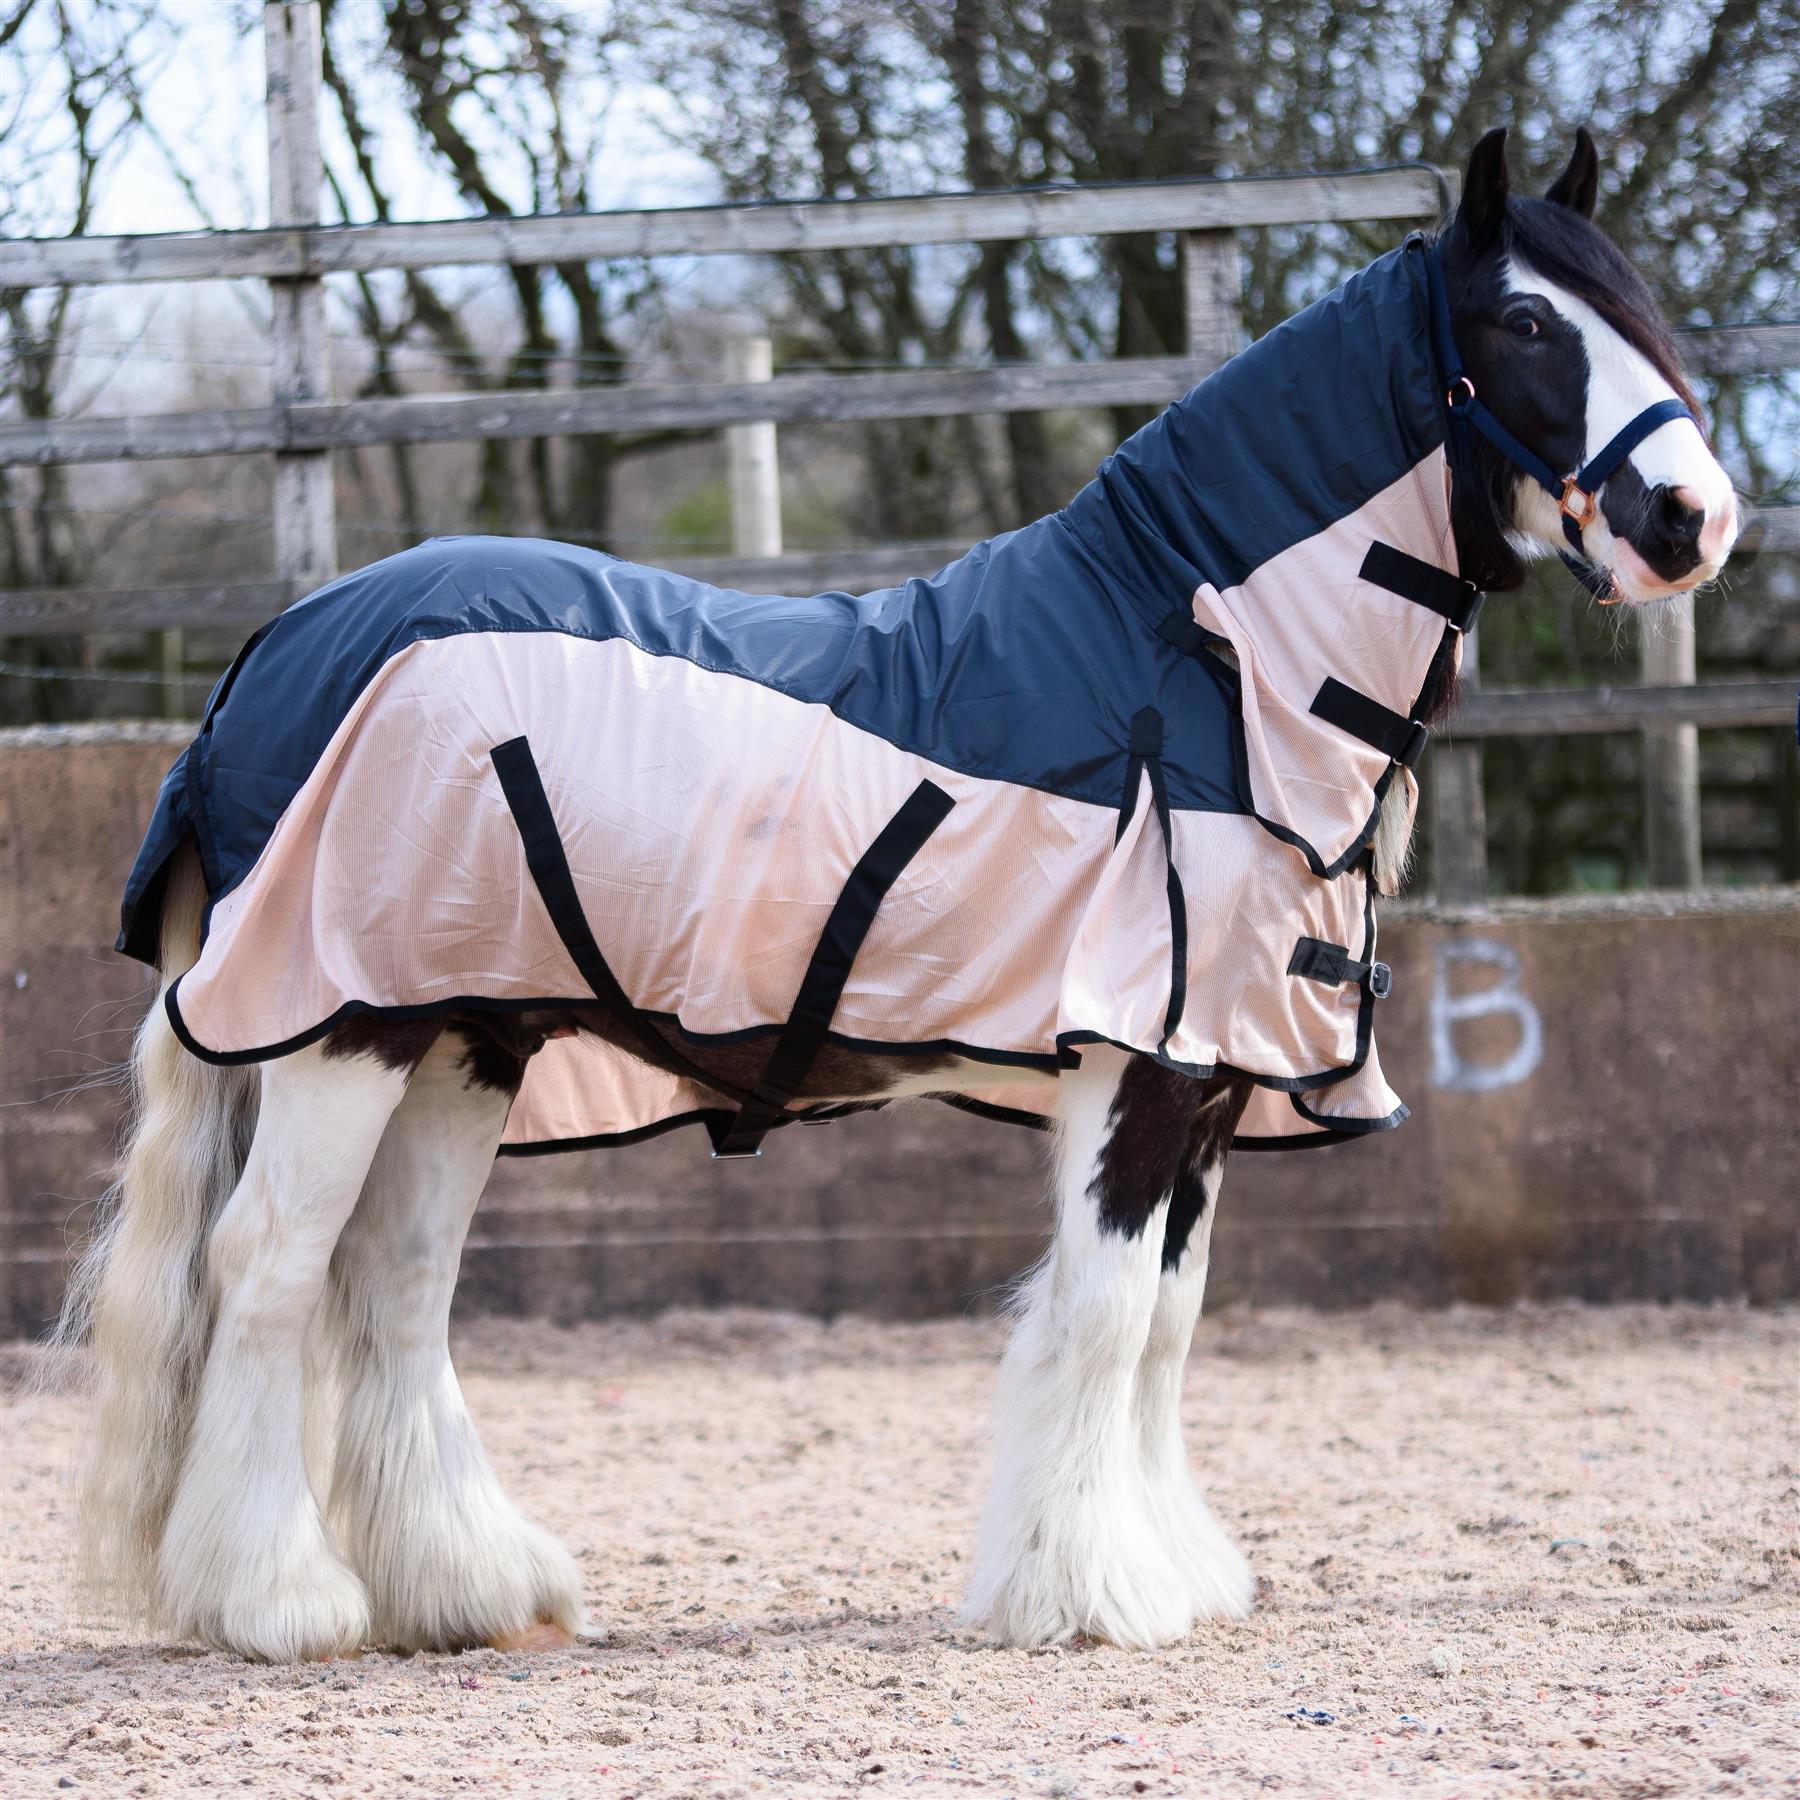 420D 2 in 1 Waterproof Fly Turnout Mesh Horse Rug Fixed Neck Black/Caramel 5'6-6'9 - Tack24